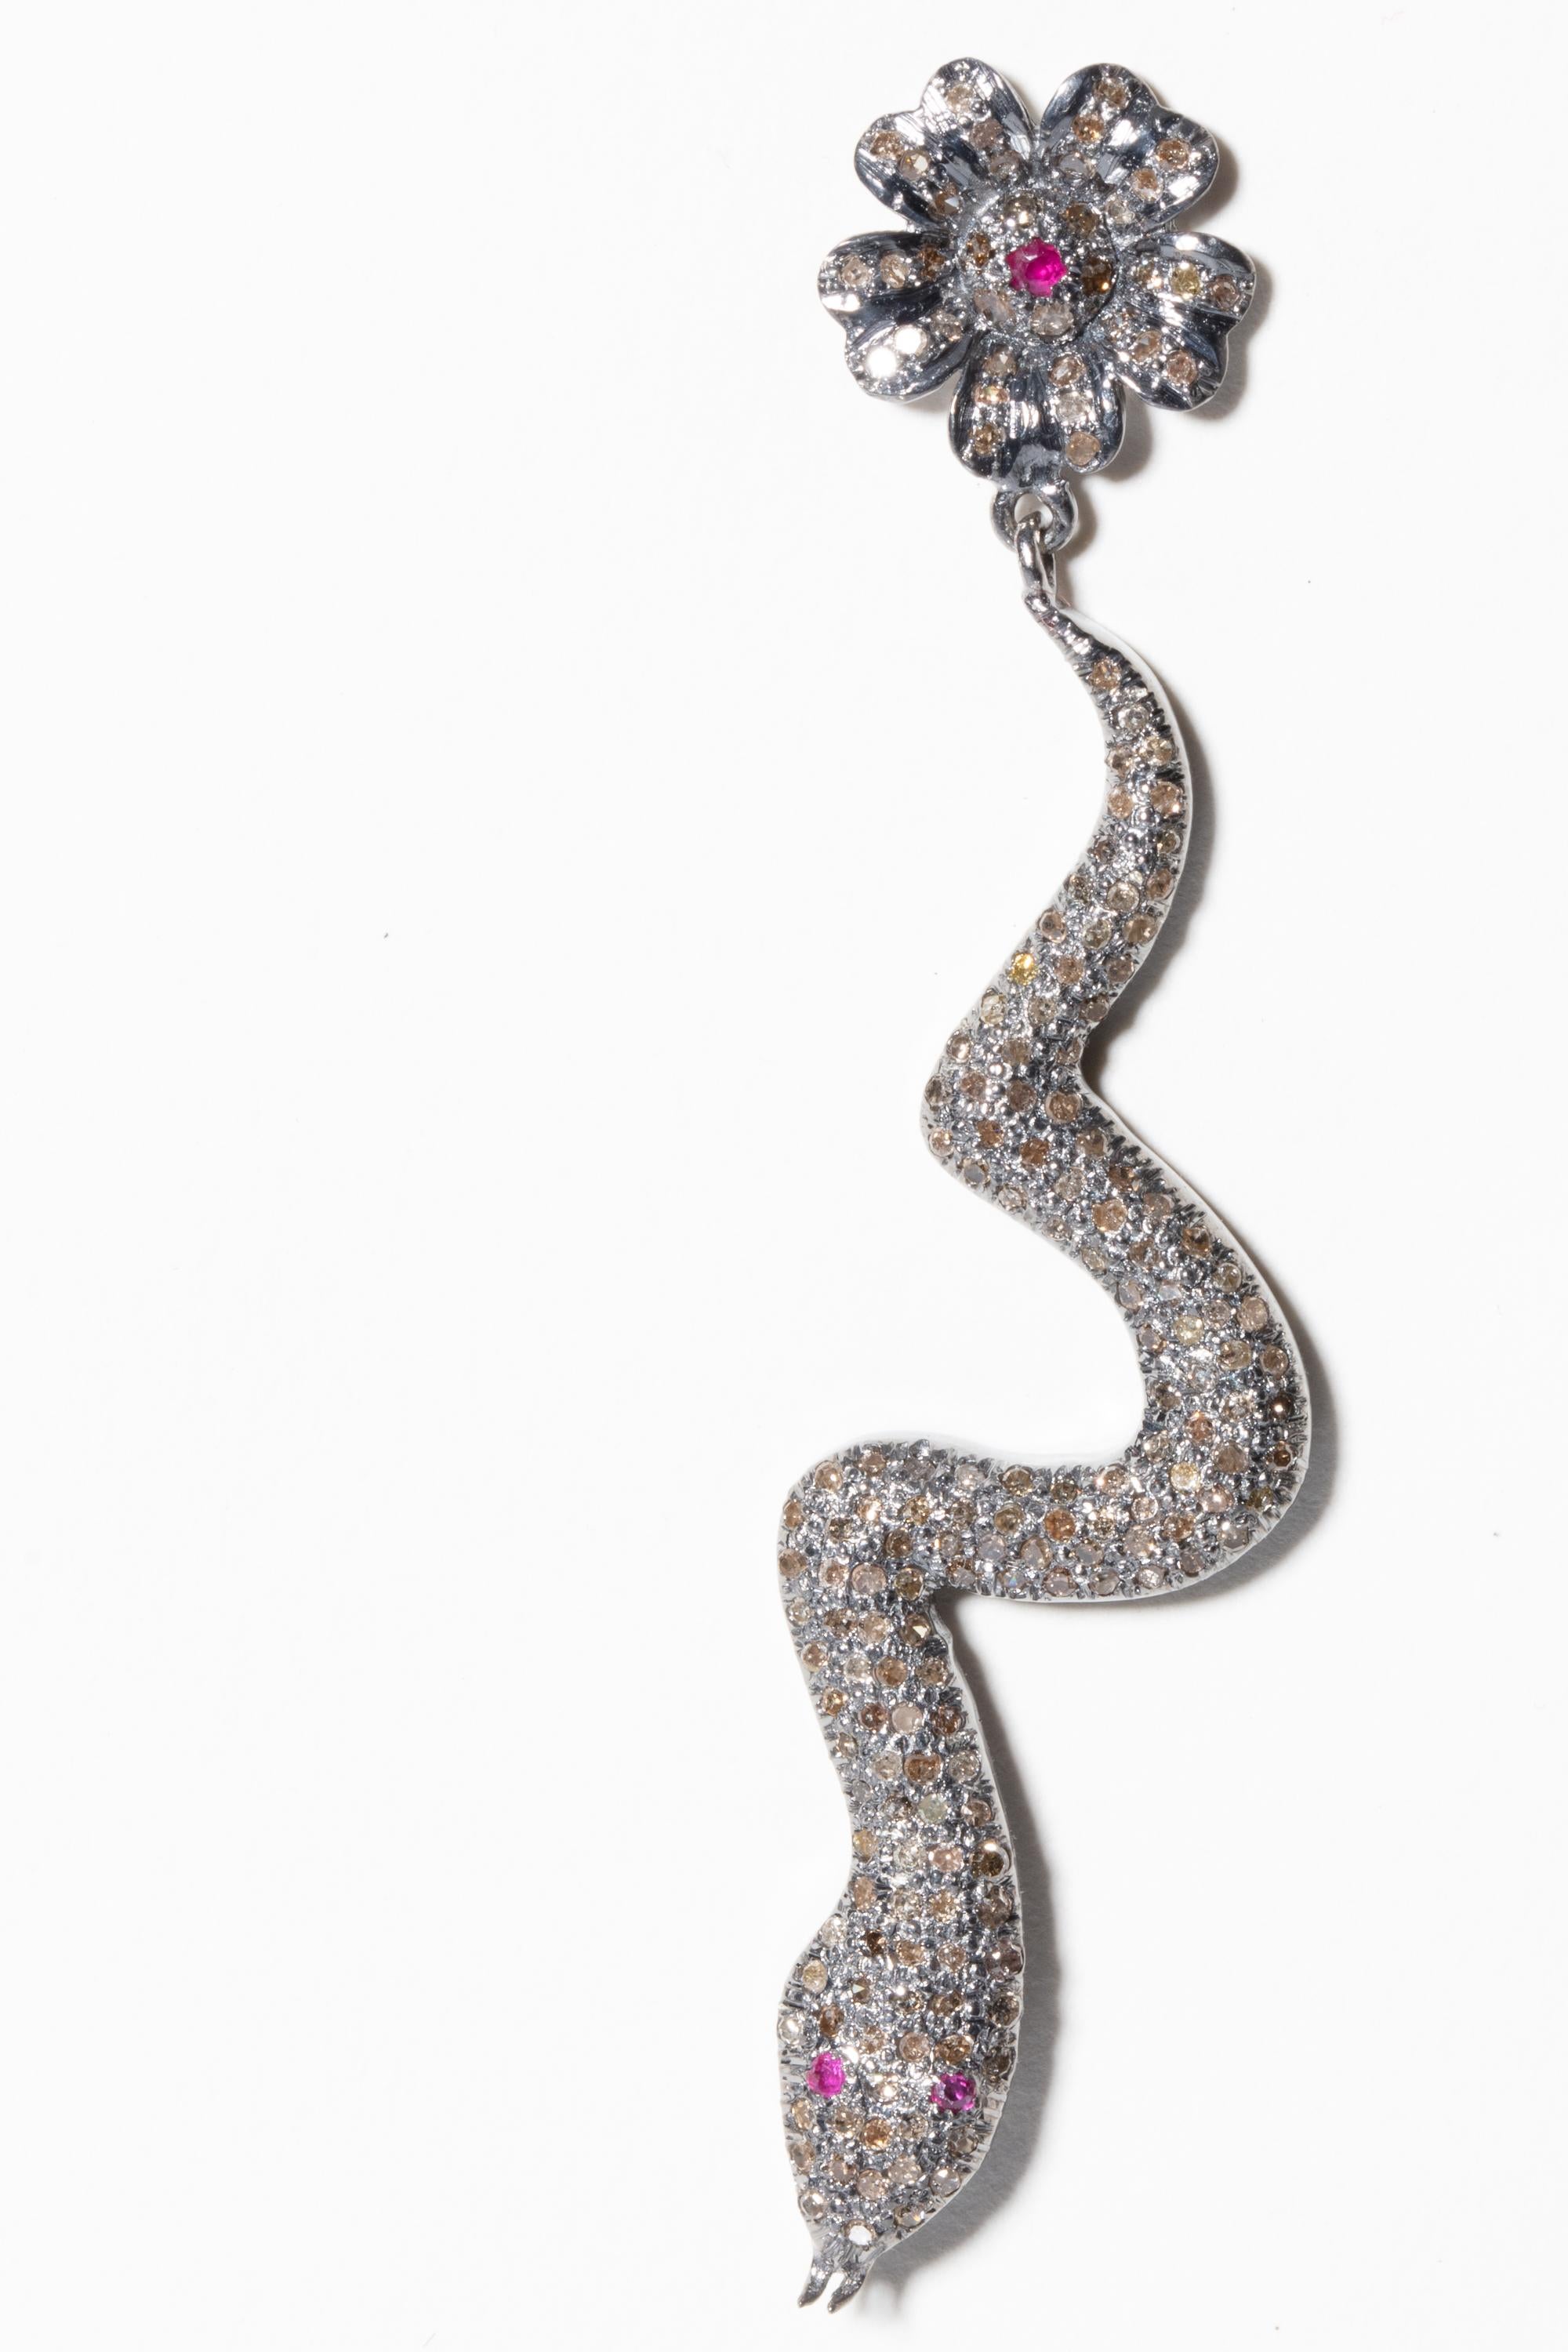 Pair of brilliant-cut, pave`-set diamond snake earrings with diamond flower motif posts with faceted ruby center.  Set in sterling silver with 18K gold post for pierced ears.  Weight of diamonds is 1.82 carats.